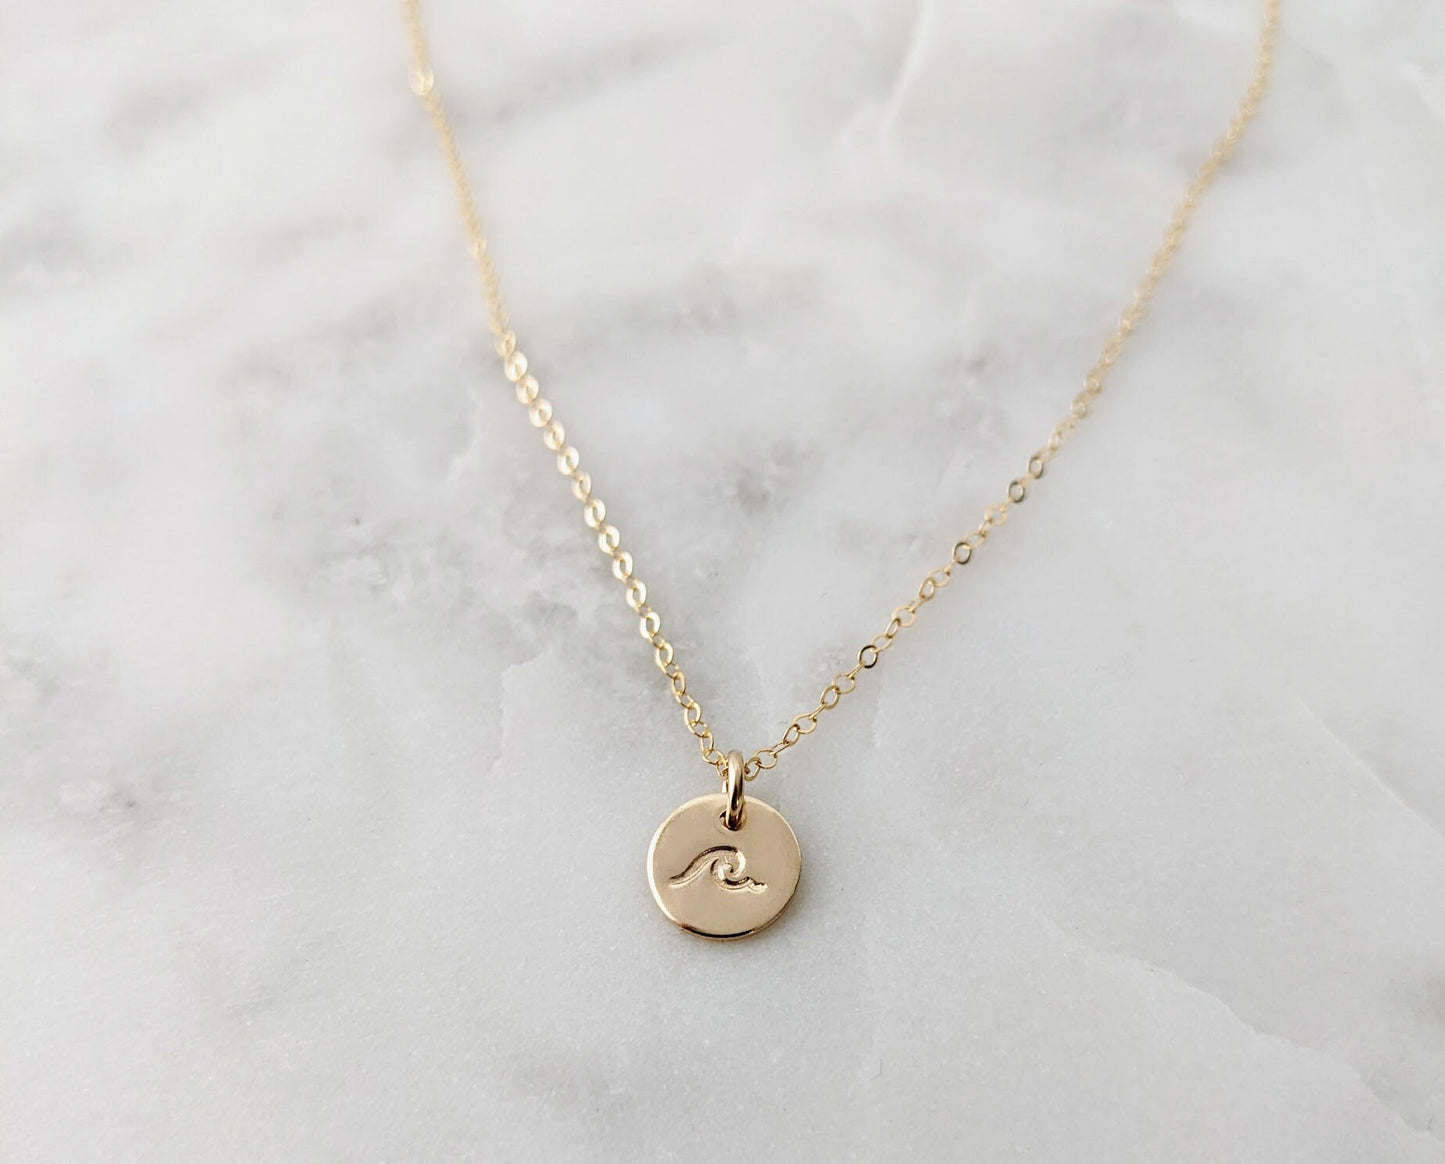 Tiny Wave Necklace | Ocean Lover Gift | Sterling Silver or 14k gold fill | Tiny Disc Necklace